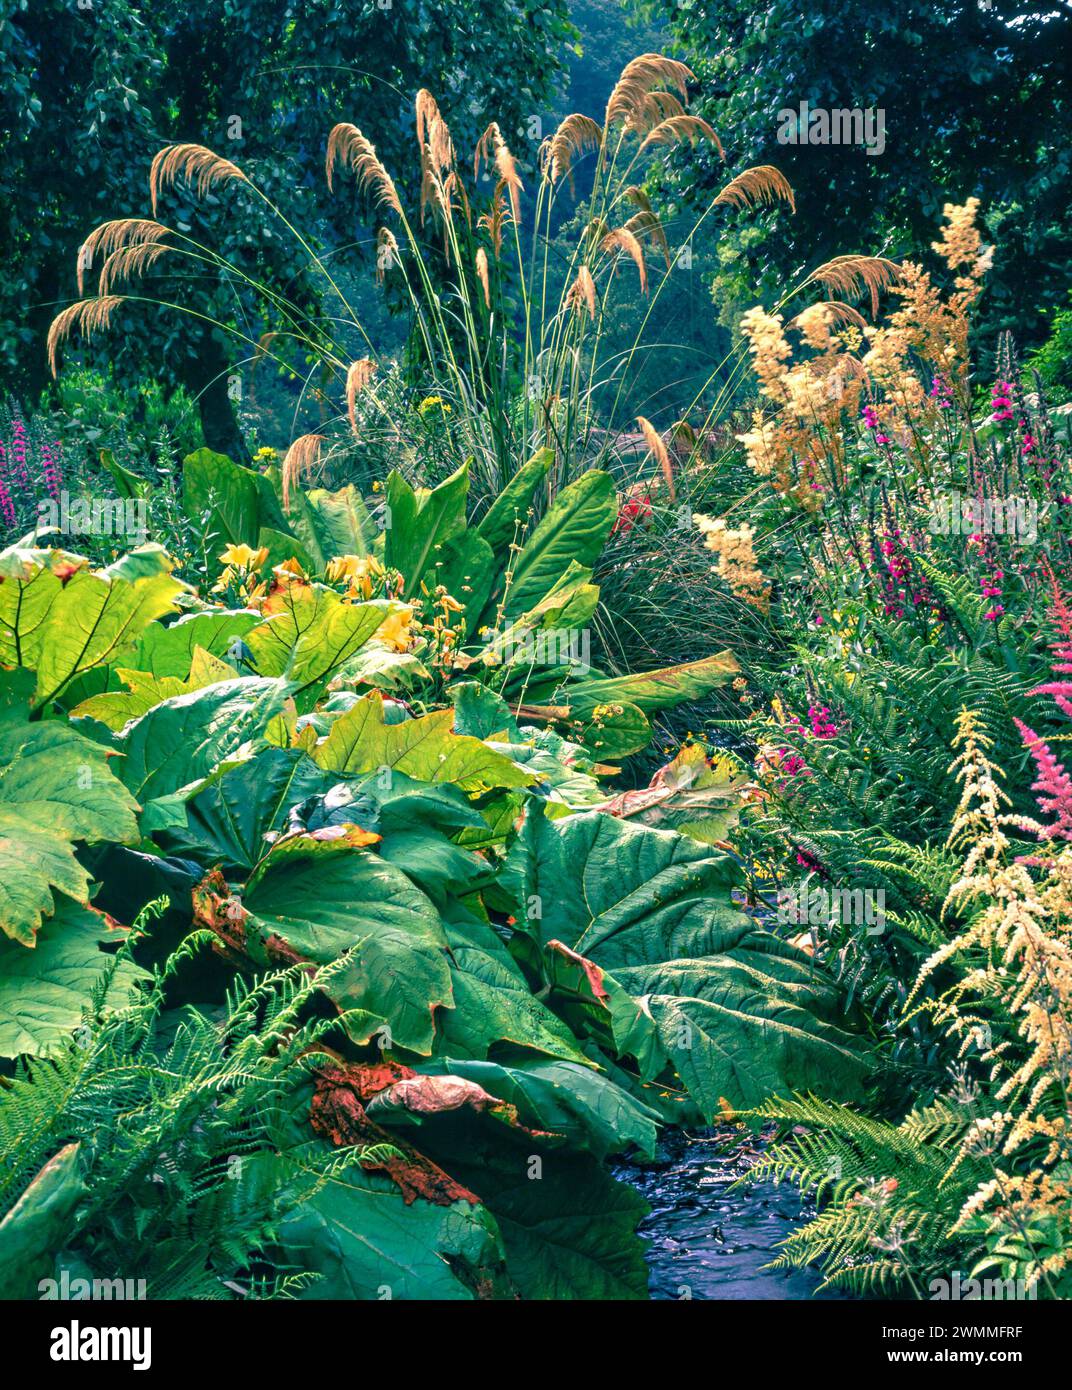 Bog garden with Gunnera magellanica, tall ornamental stipa grasses and astilbes, growing in Marwood Hill Gardens in the 1990s, Devon, England, UK Stock Photo